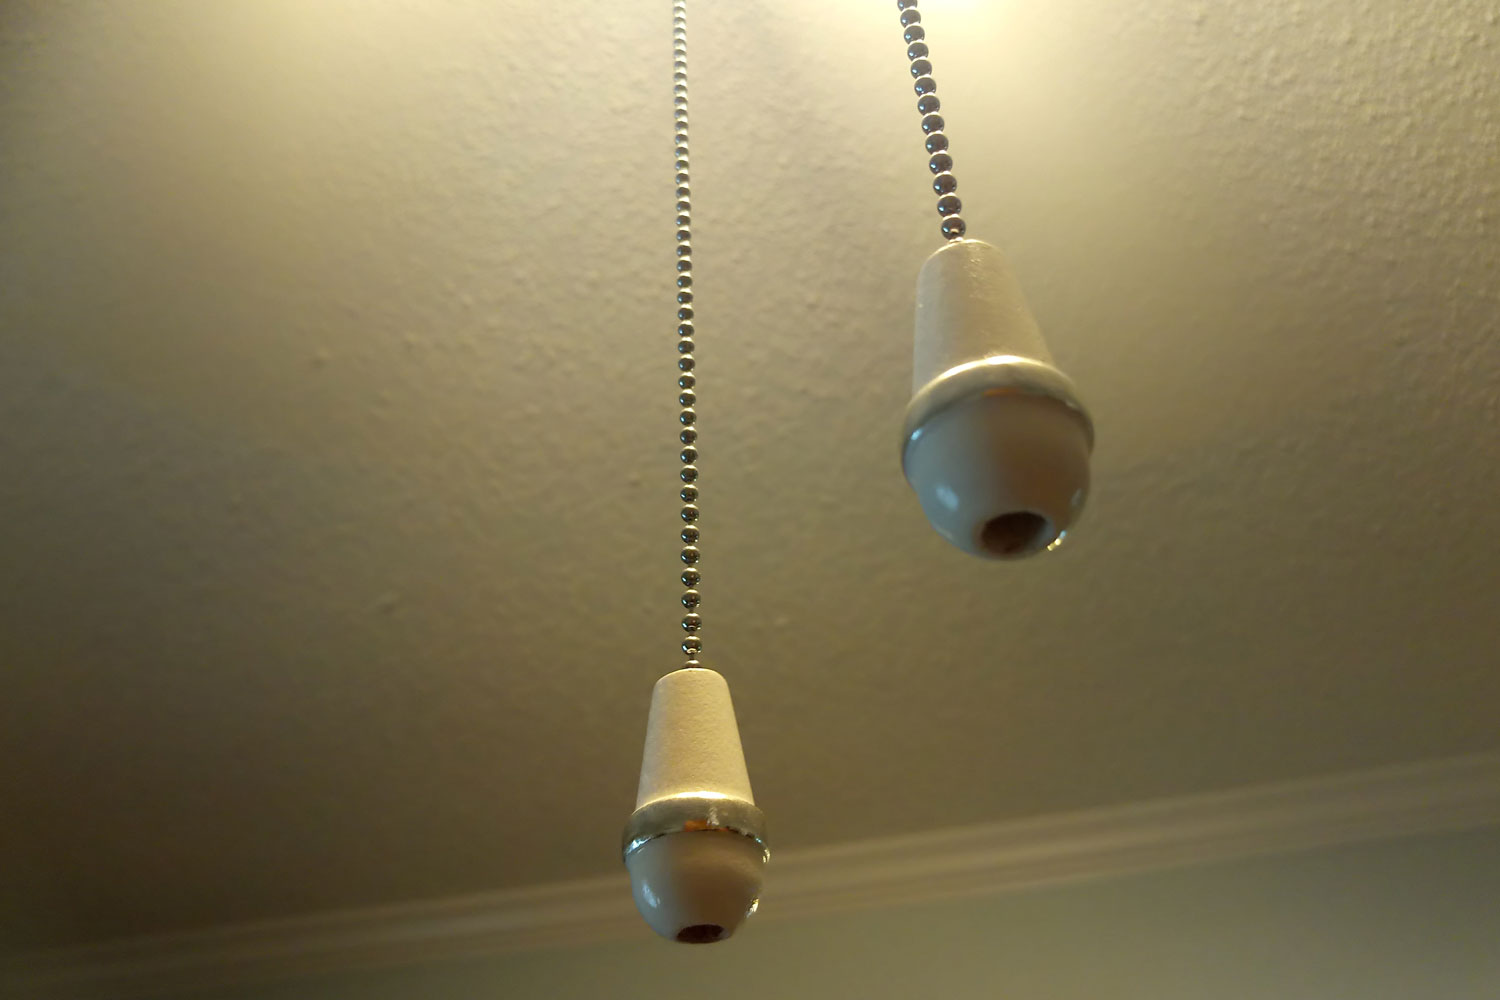 A pull chain of a ceiling fan